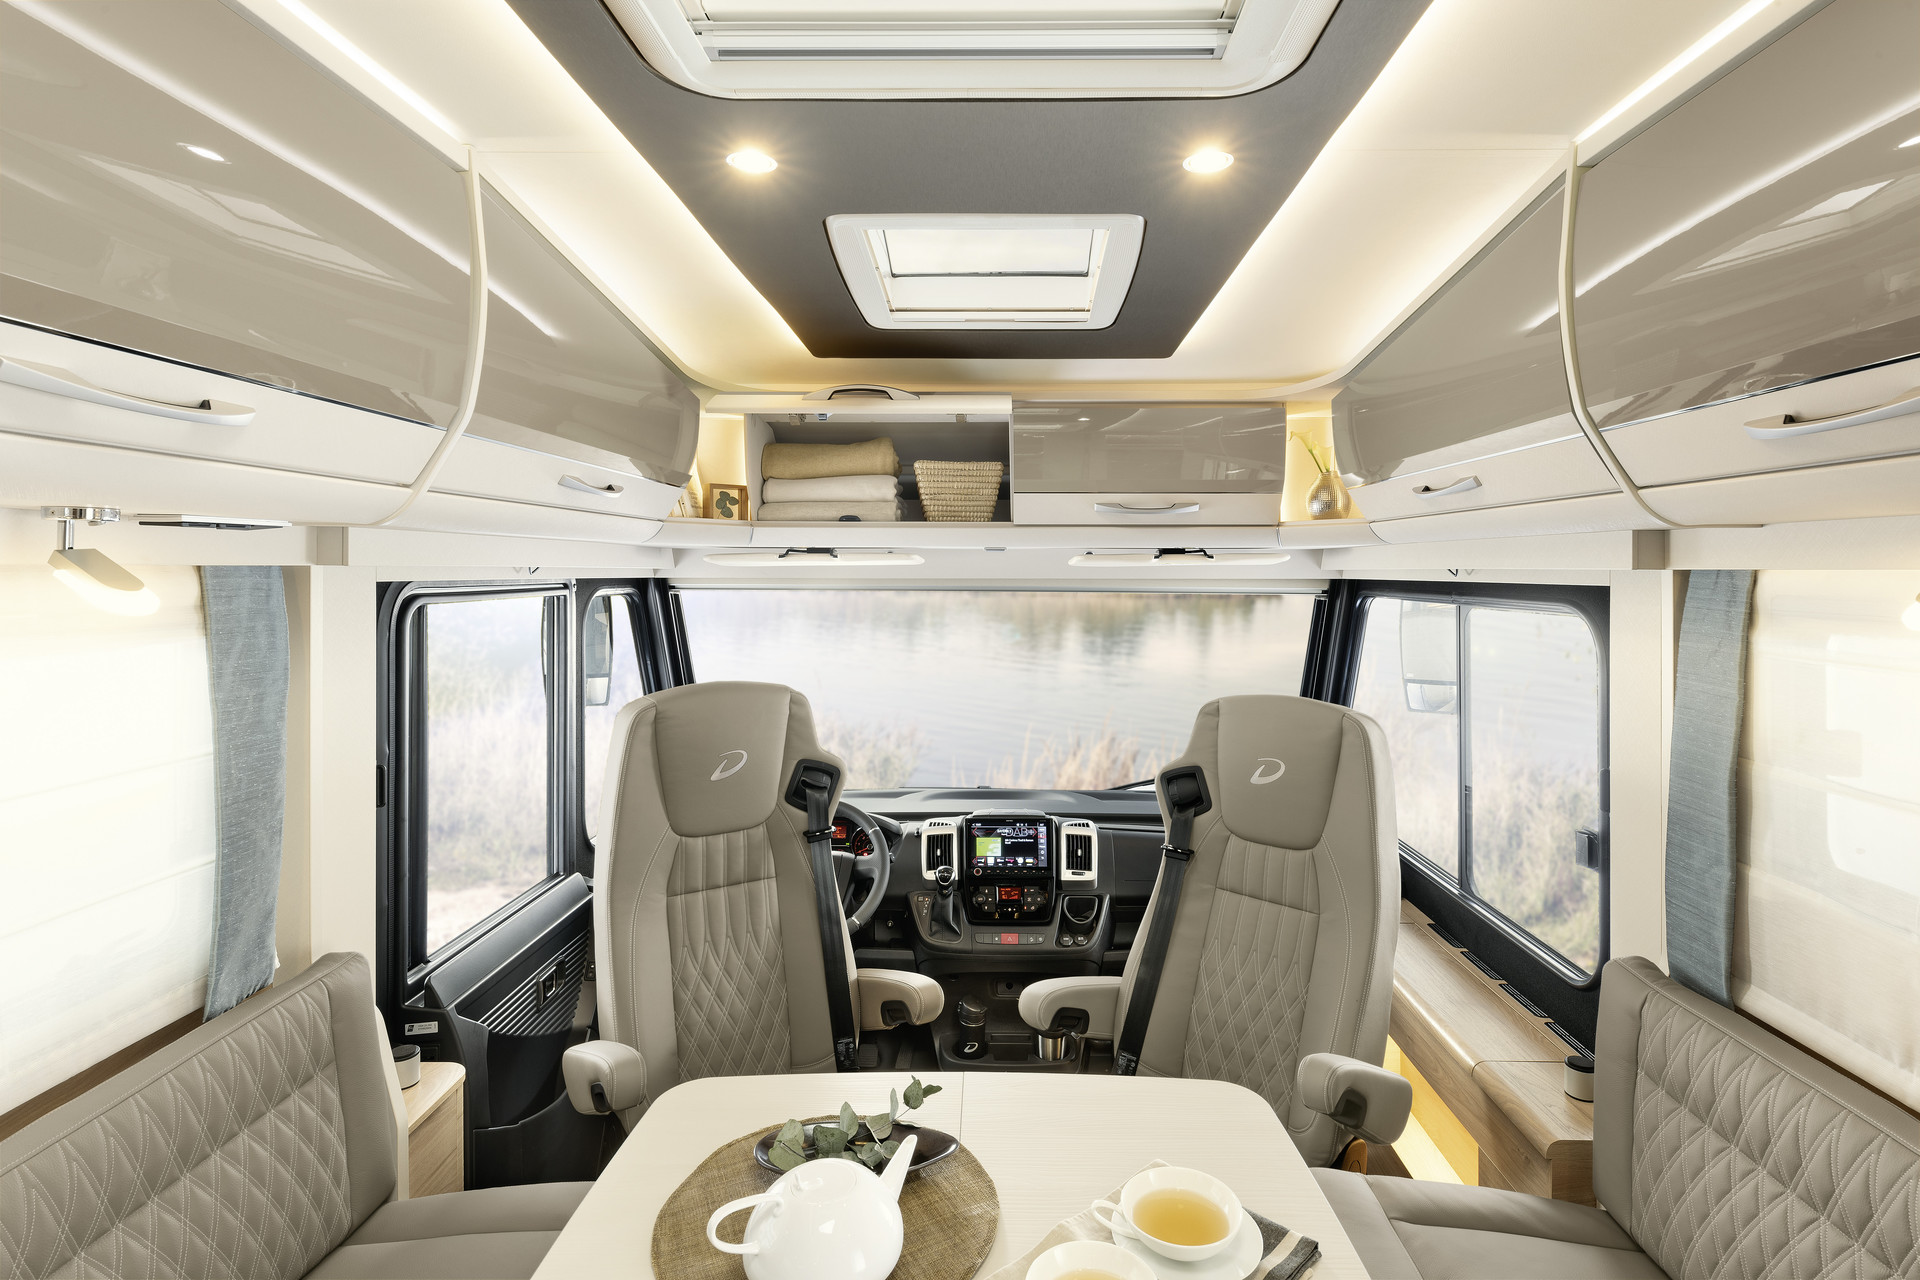 The alternative: furniture in the cab instead of a pull-down bed! This creates an even greater sense of spaciousness and more headroom – as well as additional storage options (optional)